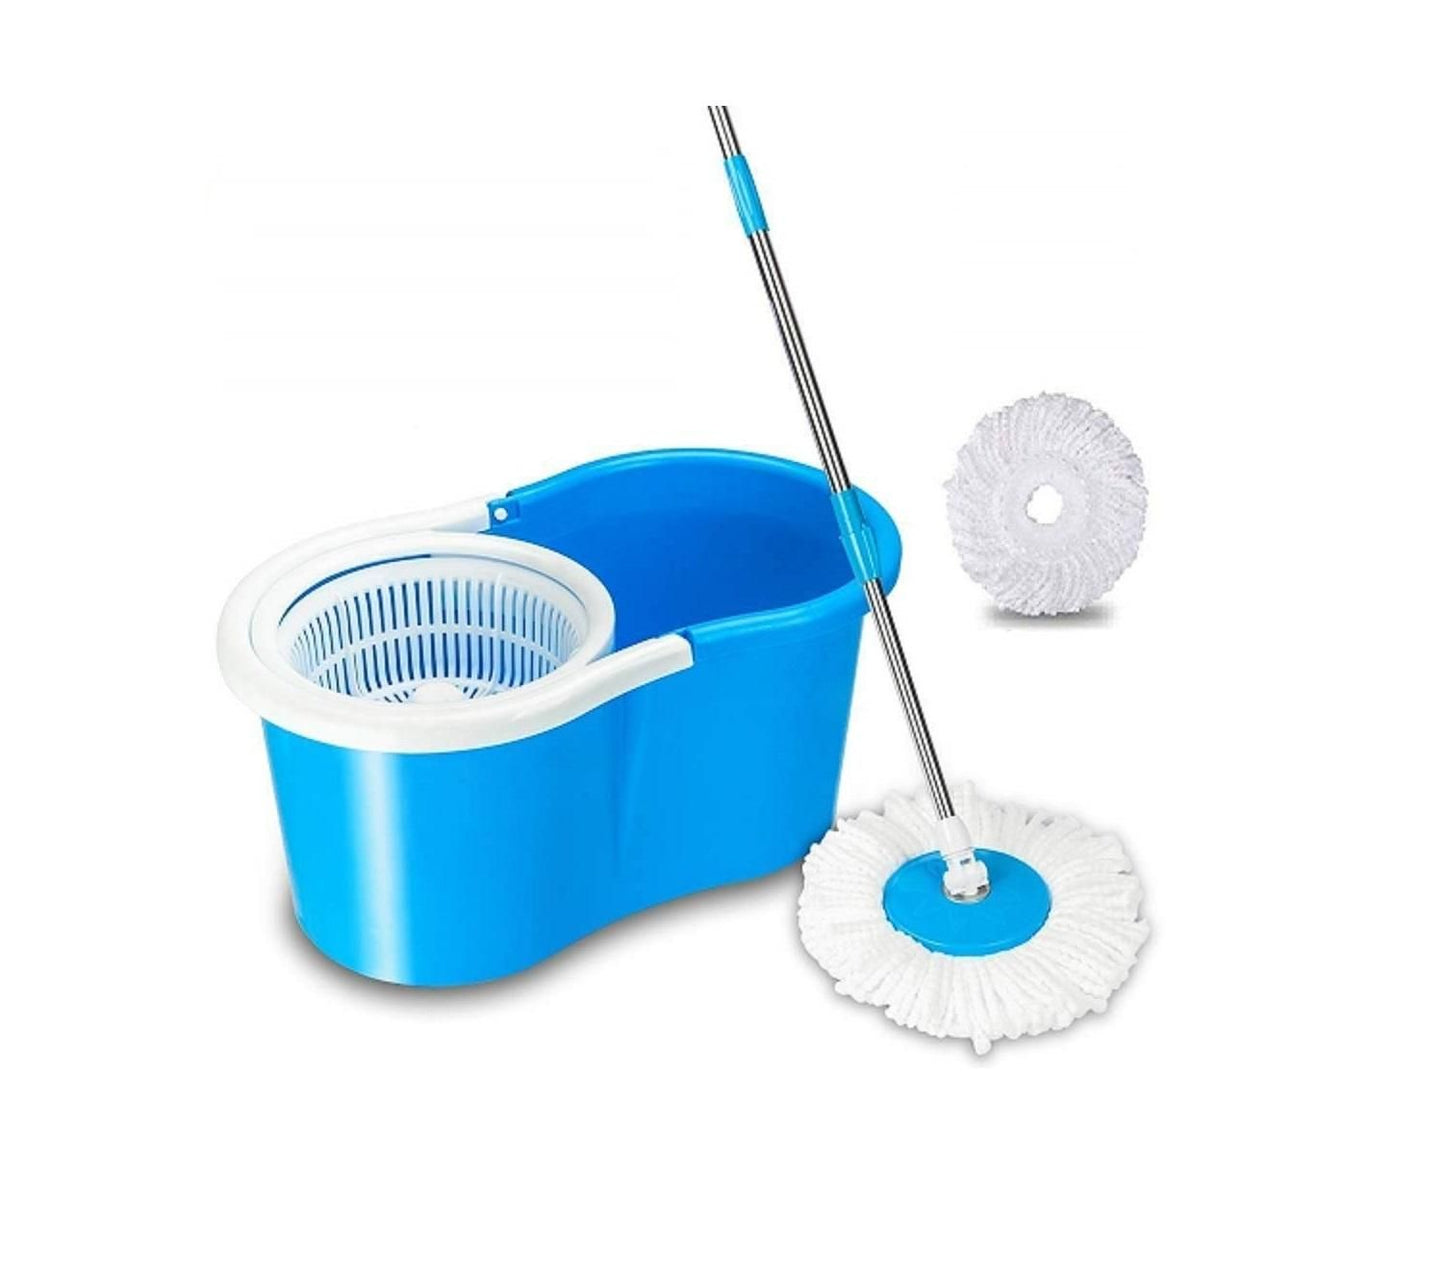 Mop - 360 Degree Spin Bucket Mop With 2 Microfiber Head - Shopaholics